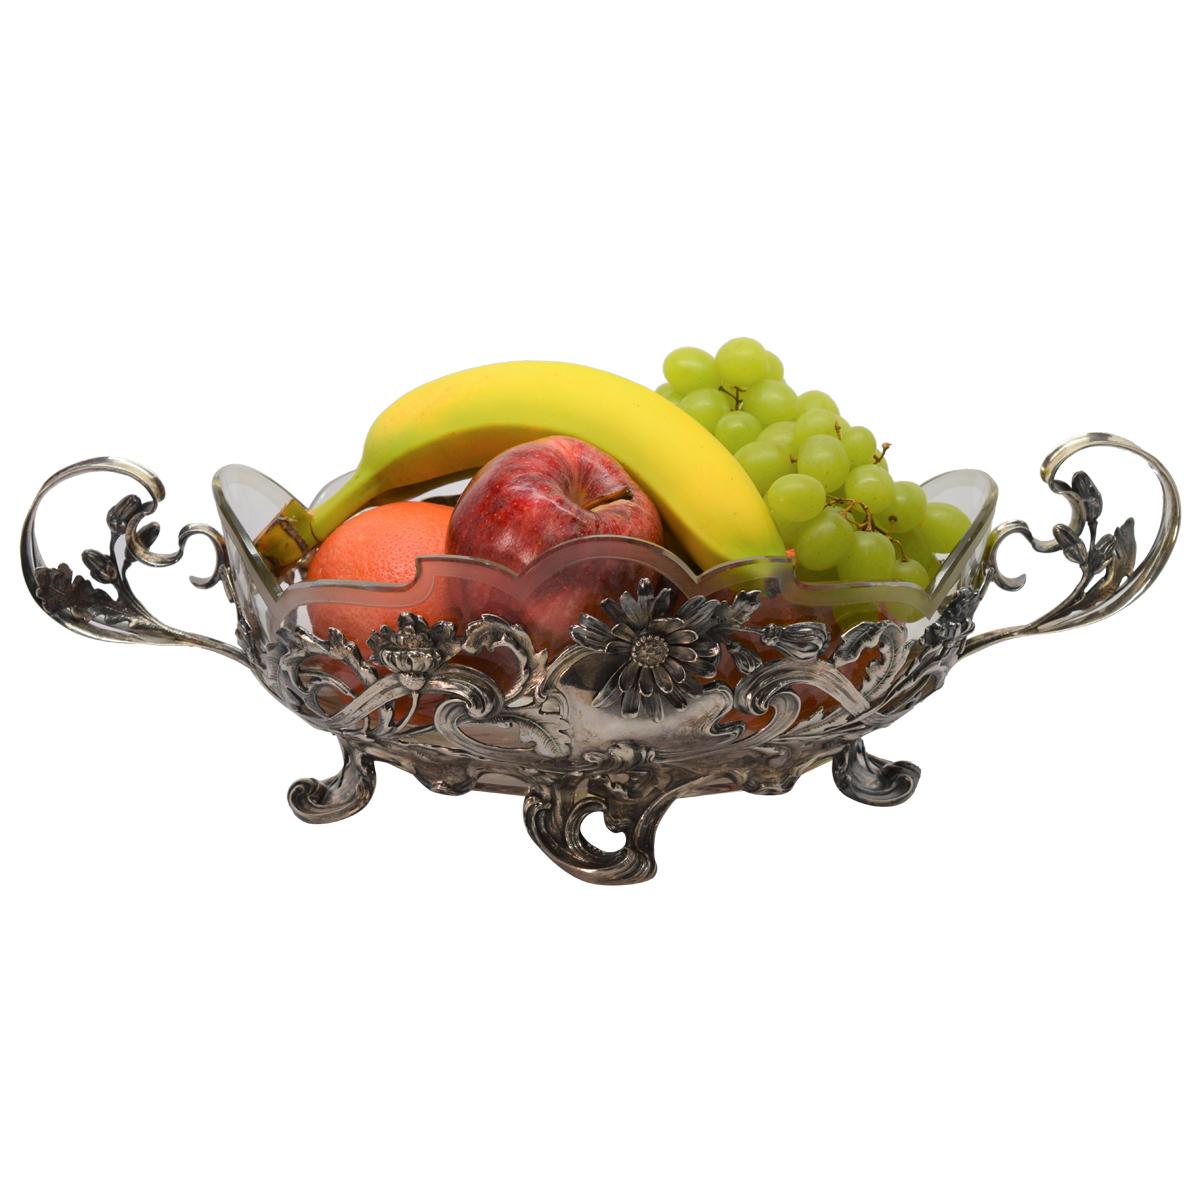 fruit bowl stand resurfaced by BMC Vintage Design Studio FOOD SAFE footed bowl,centerpiece Matt Cream Vintage silver plate footed Compote